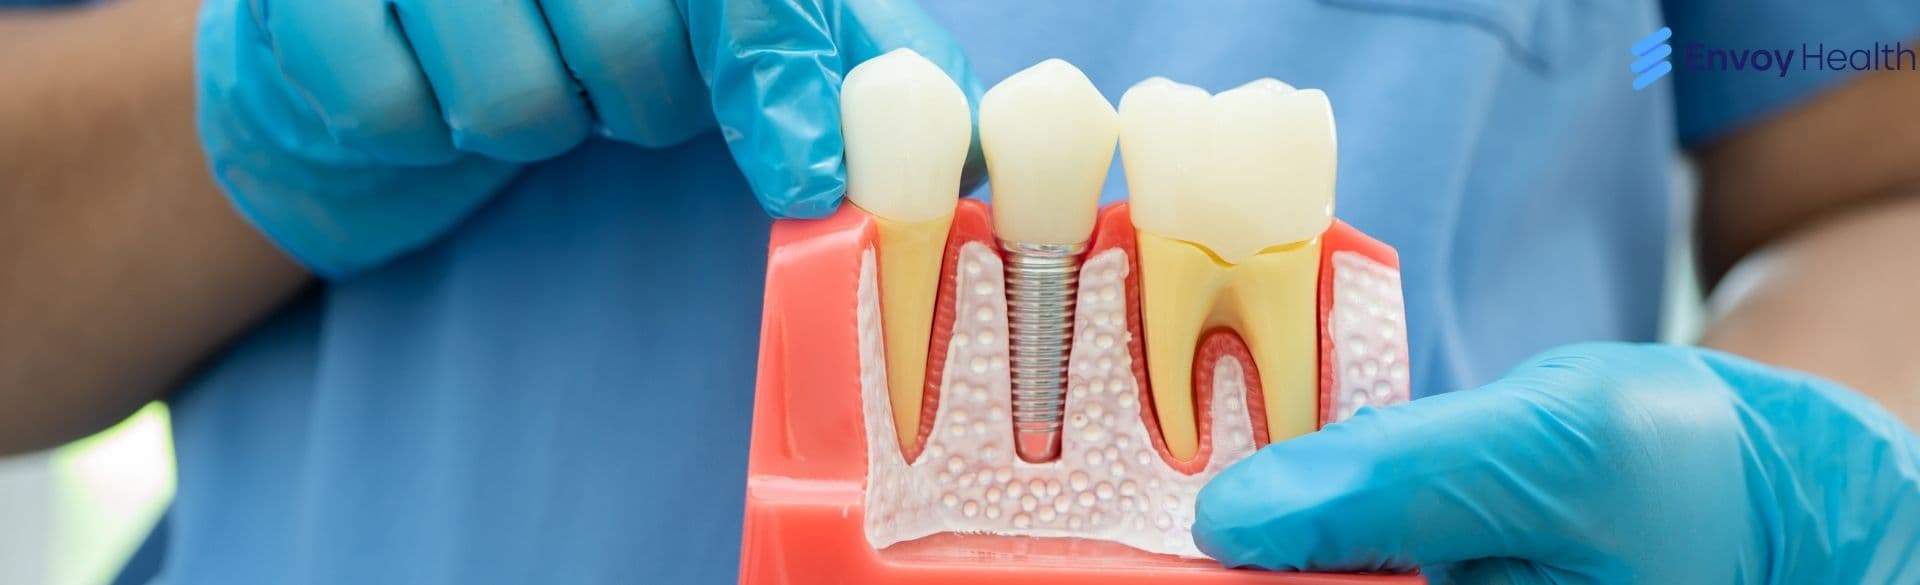 Everything You Need To Know About All-on-4 Dental Implants Algodones, Mexico